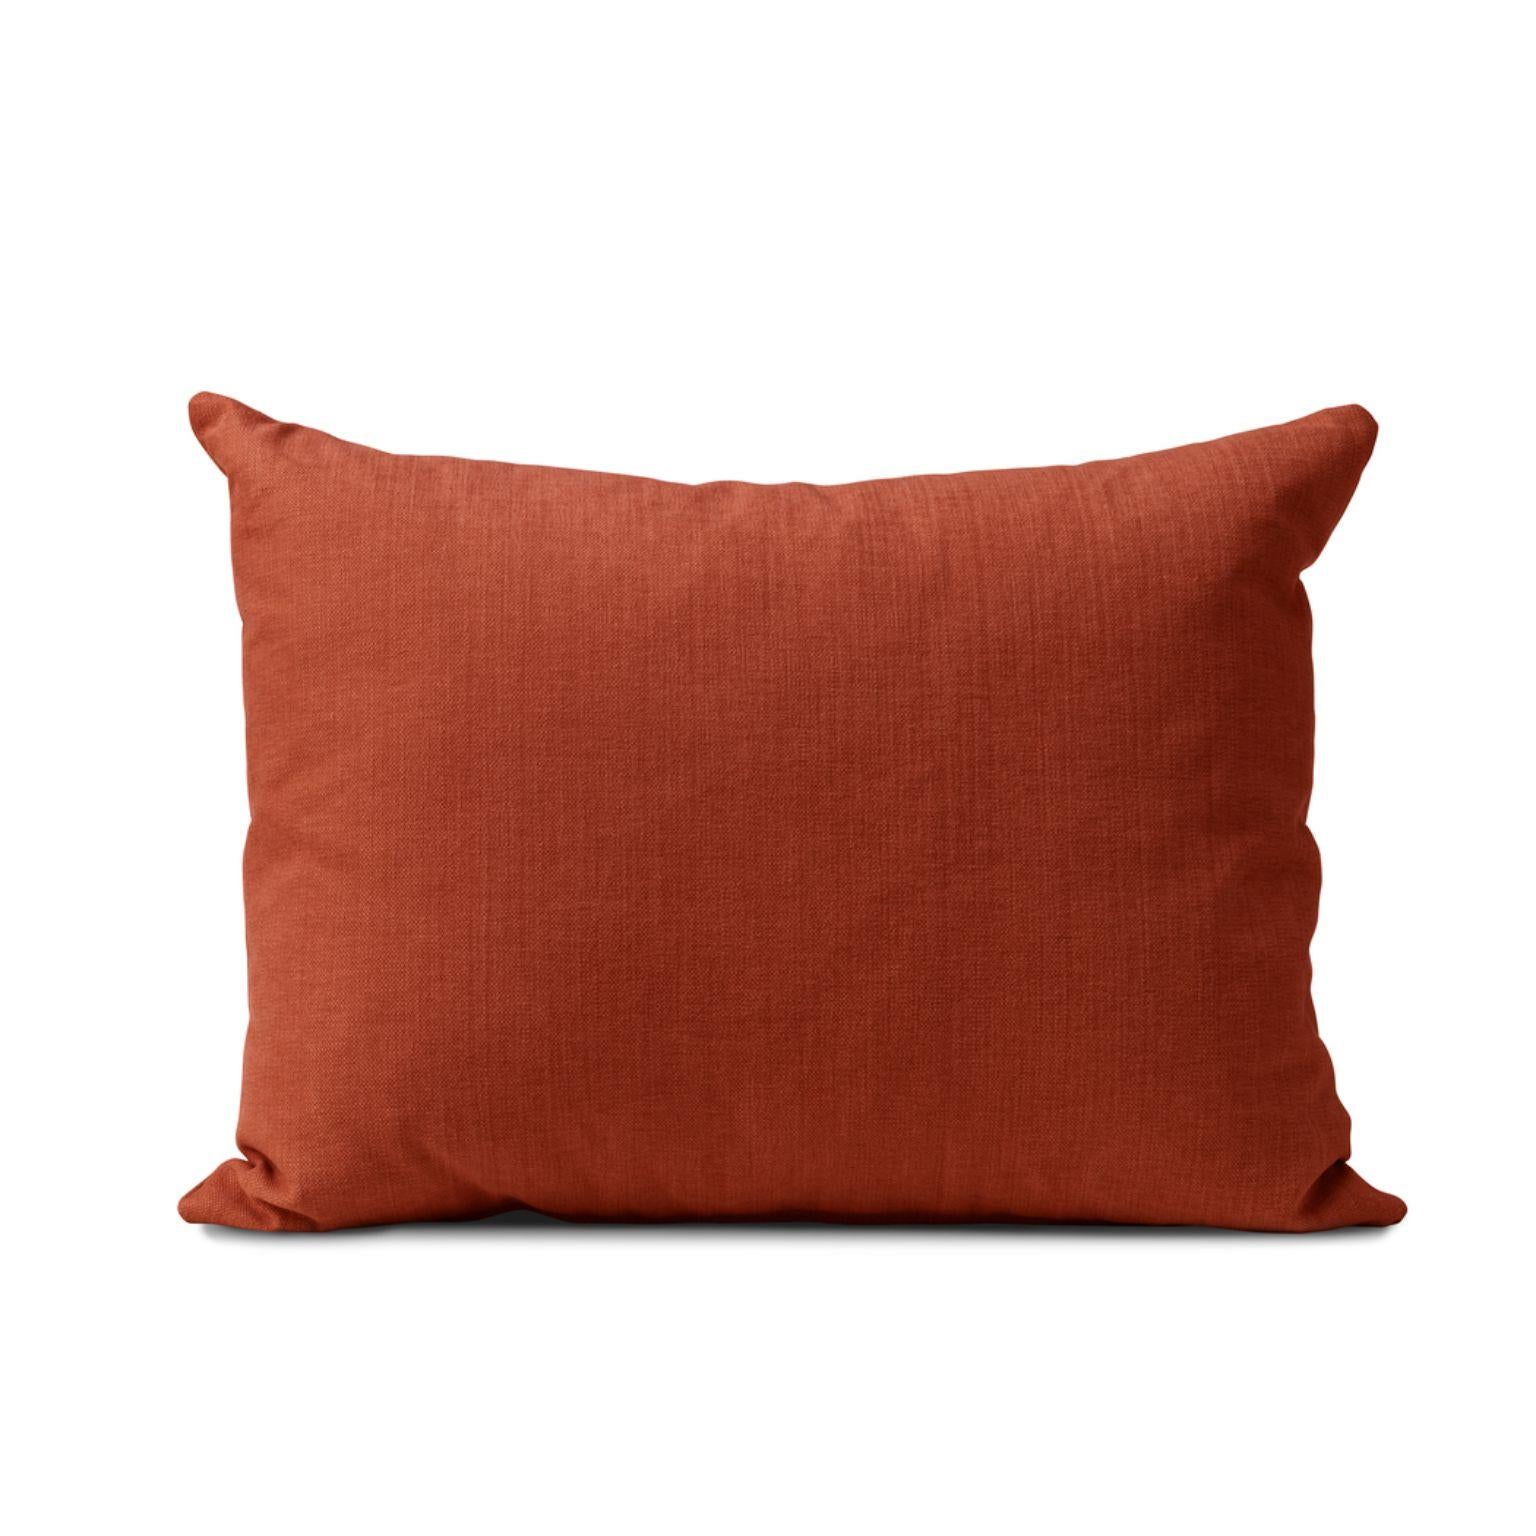 Galore cushion square maple red by Warm Nordic
Dimensions: D70 x H 50 cm
Material: Textile upholstery, Granulate and feathers filling.
Weight: 1.4 kg
Also available in different colours and finishes.

An elegant oversized sofa cushion, which